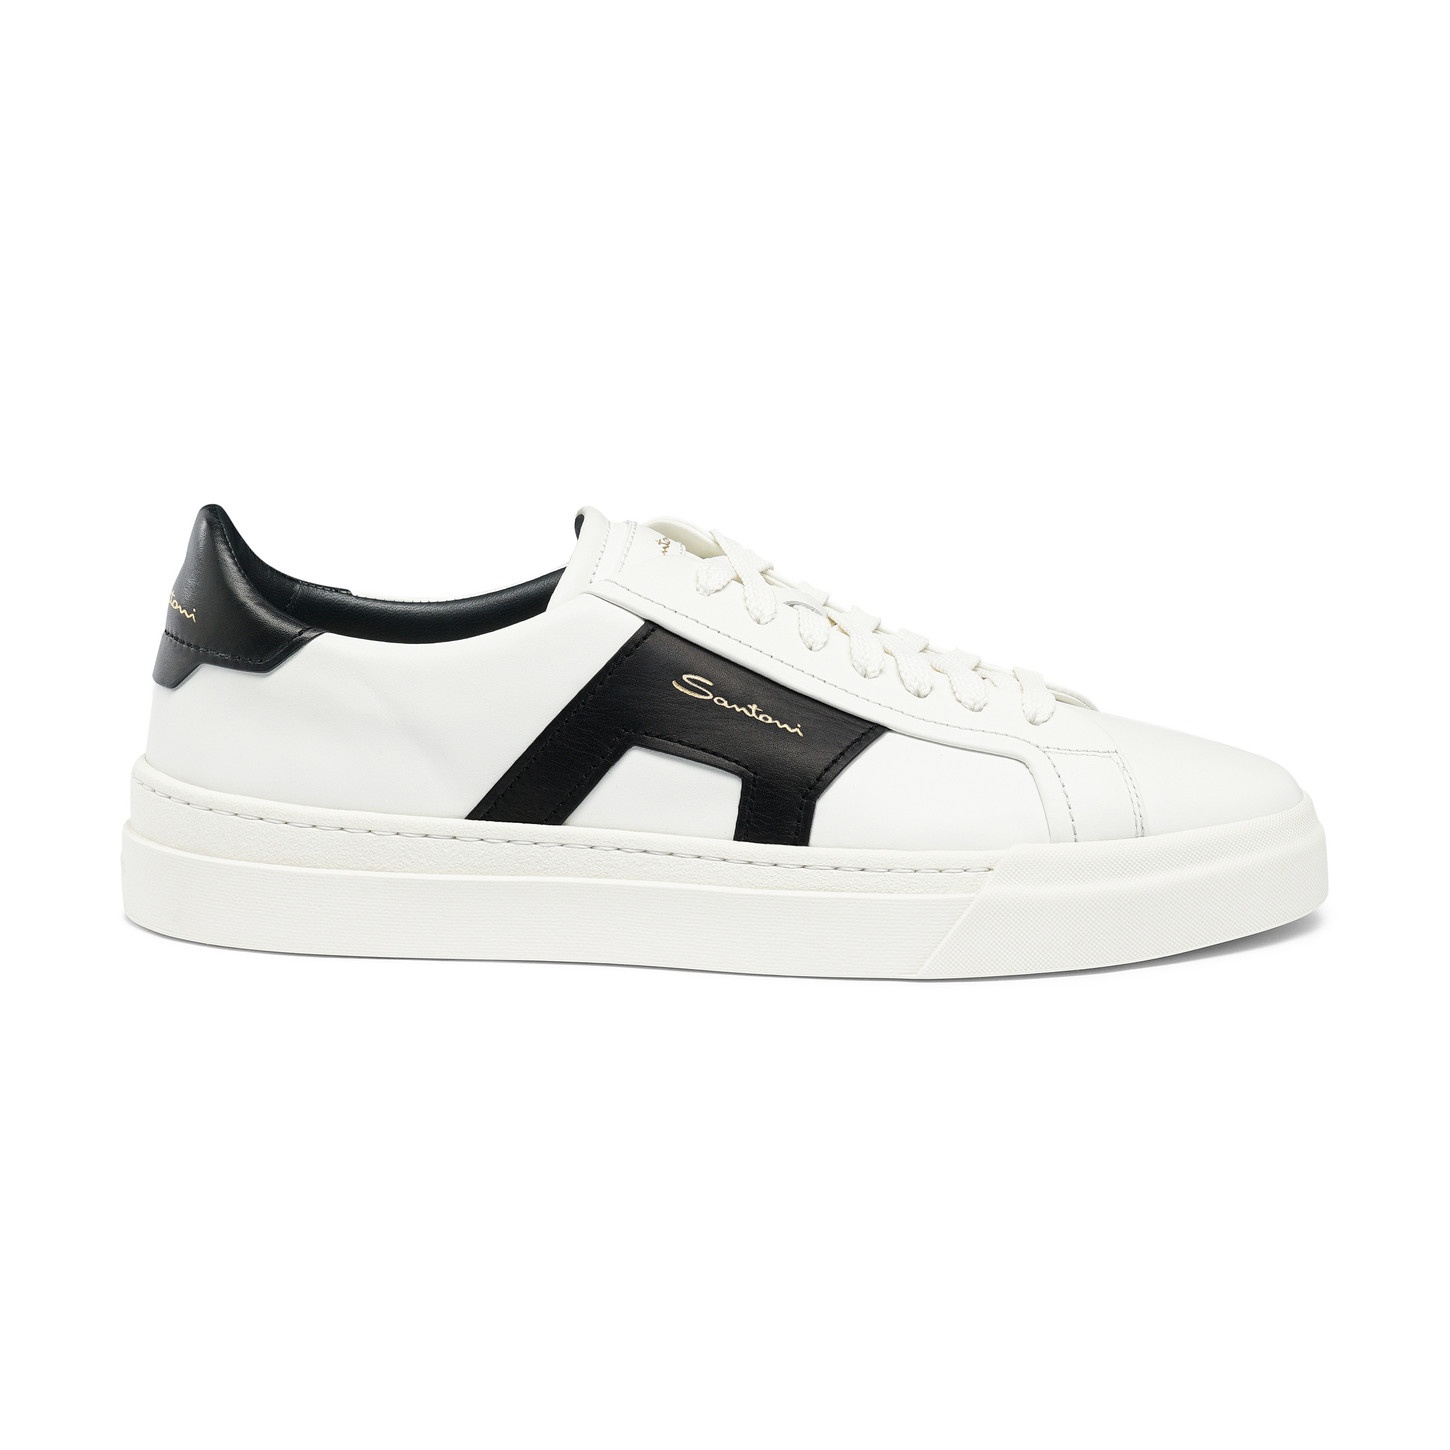 Men’s white and black leather double buckle sneaker - 1